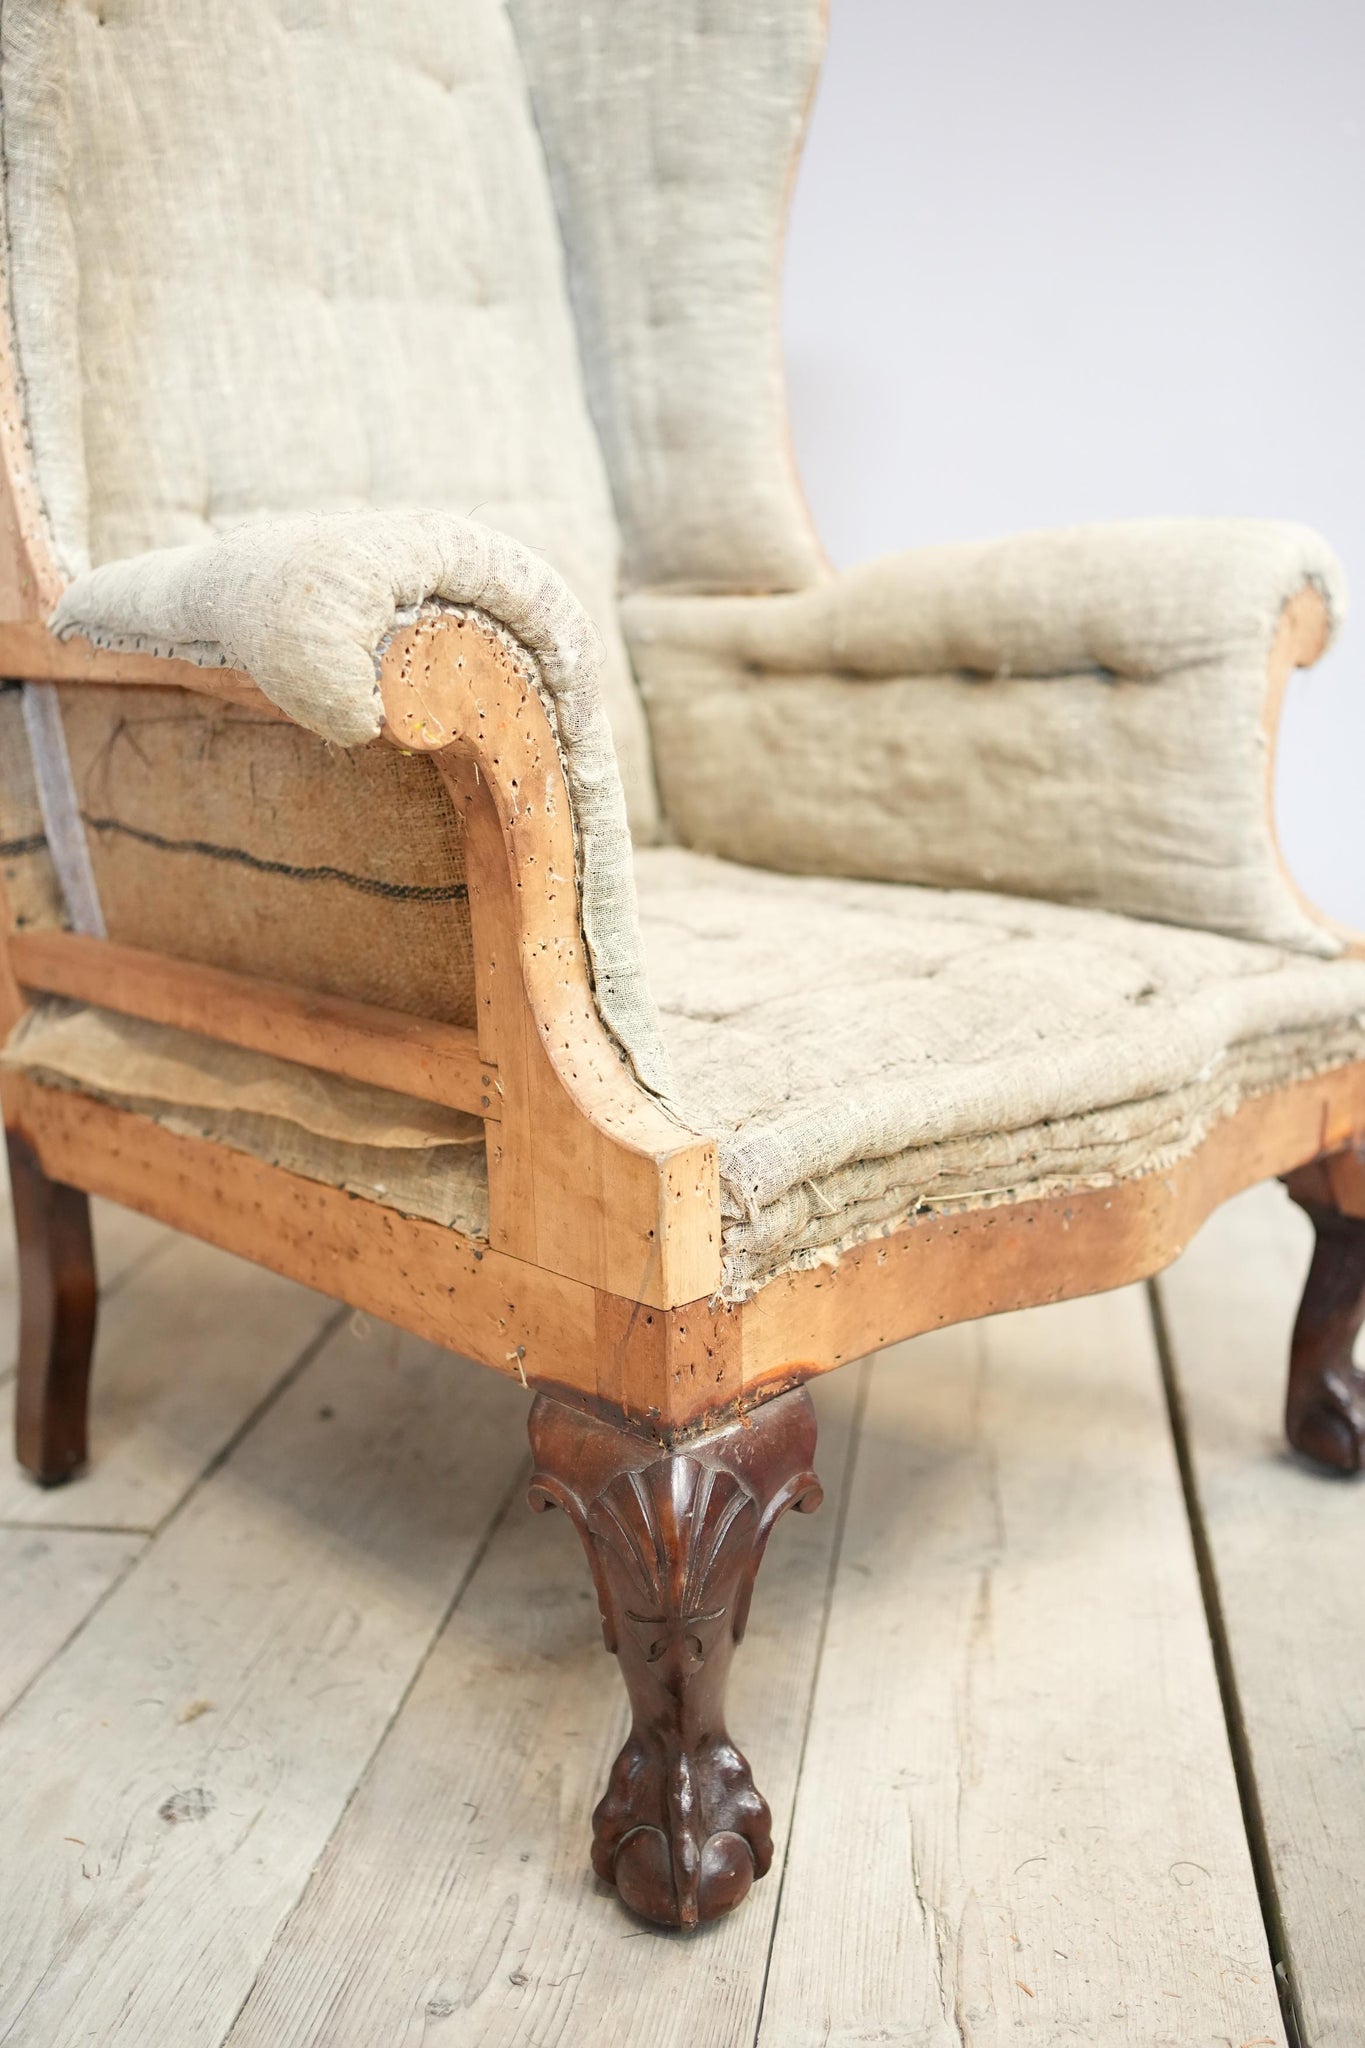 Georgian style wingback armchair with shaped seat